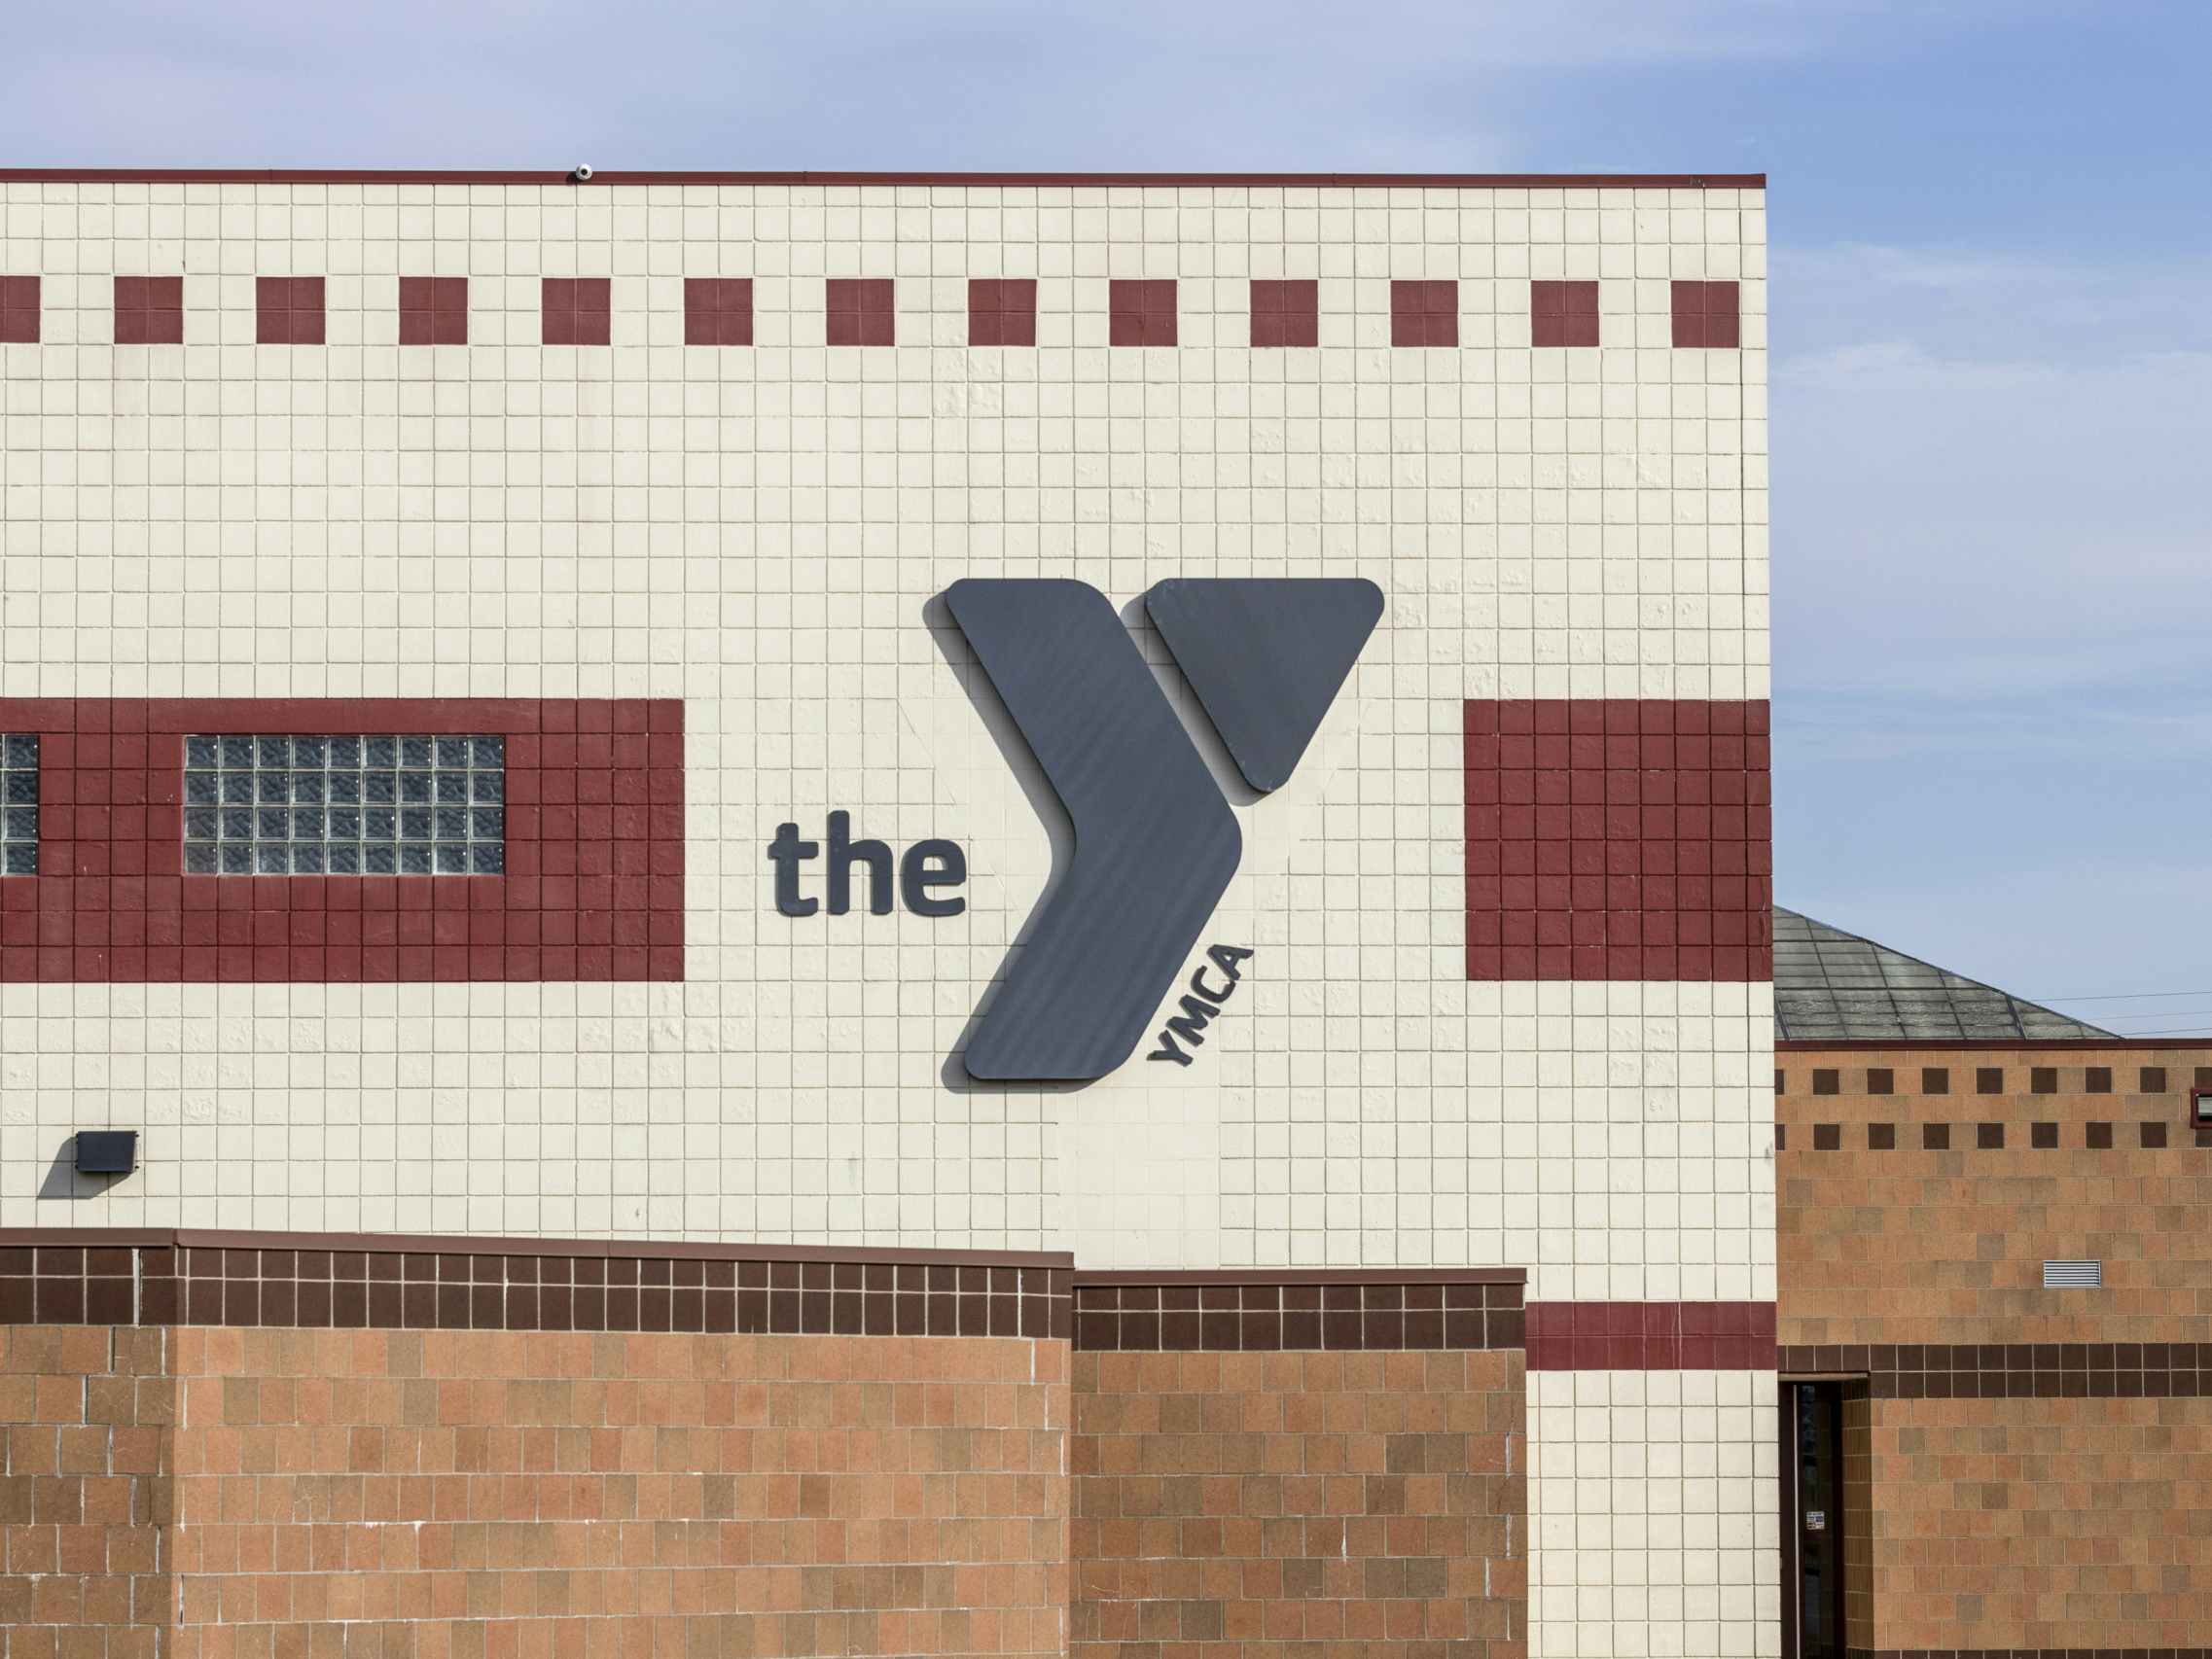 The outside of a YMCA building